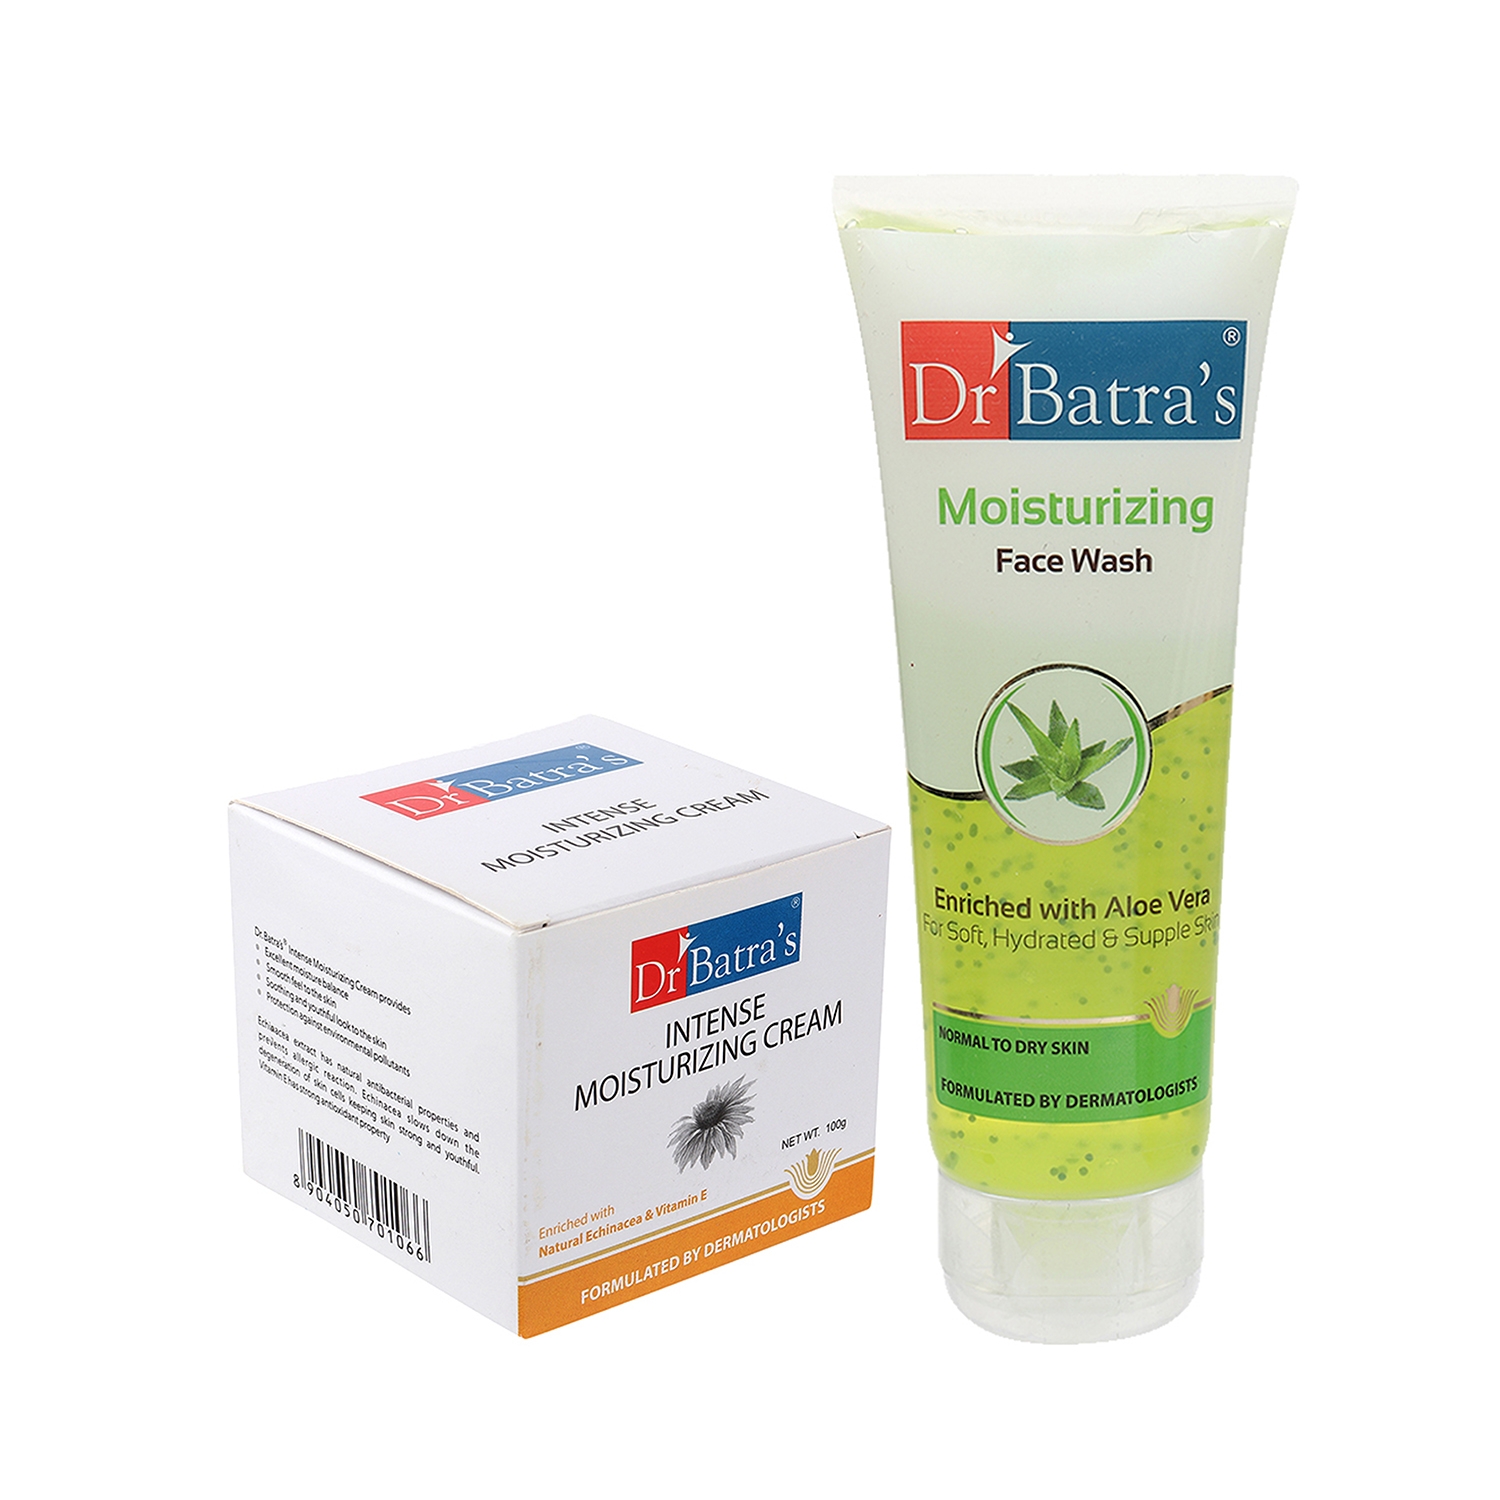 Dr Batra's | Dr Batra's Intense Moisturizing Cream -100 g and Face Wash Moisturizing - 100 gm (Pack of 2 For Men and Women)